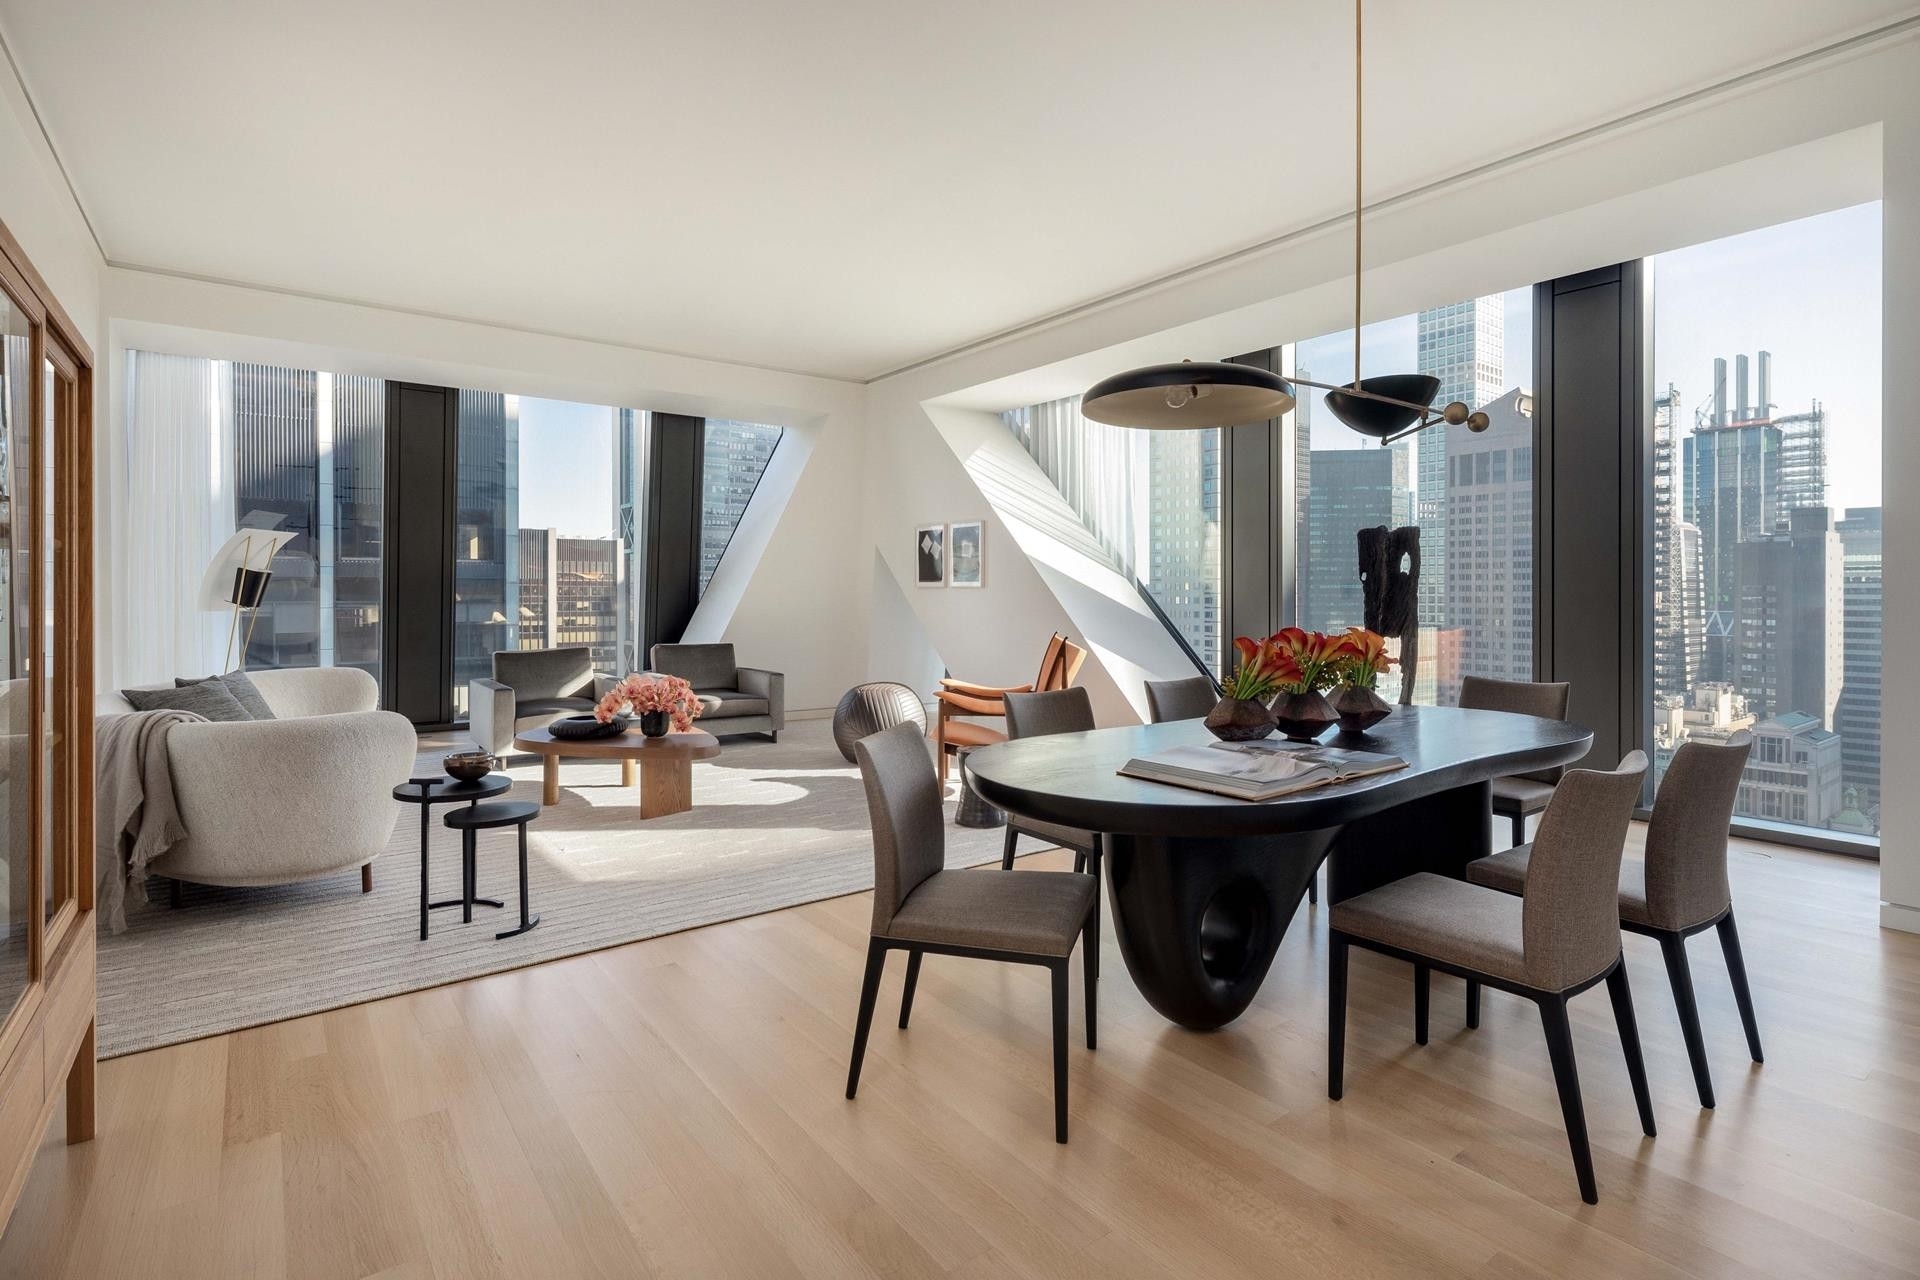 Condominium for Sale at 53W53, 53 53RD ST W, 40A Midtown West, New York, NY 10019